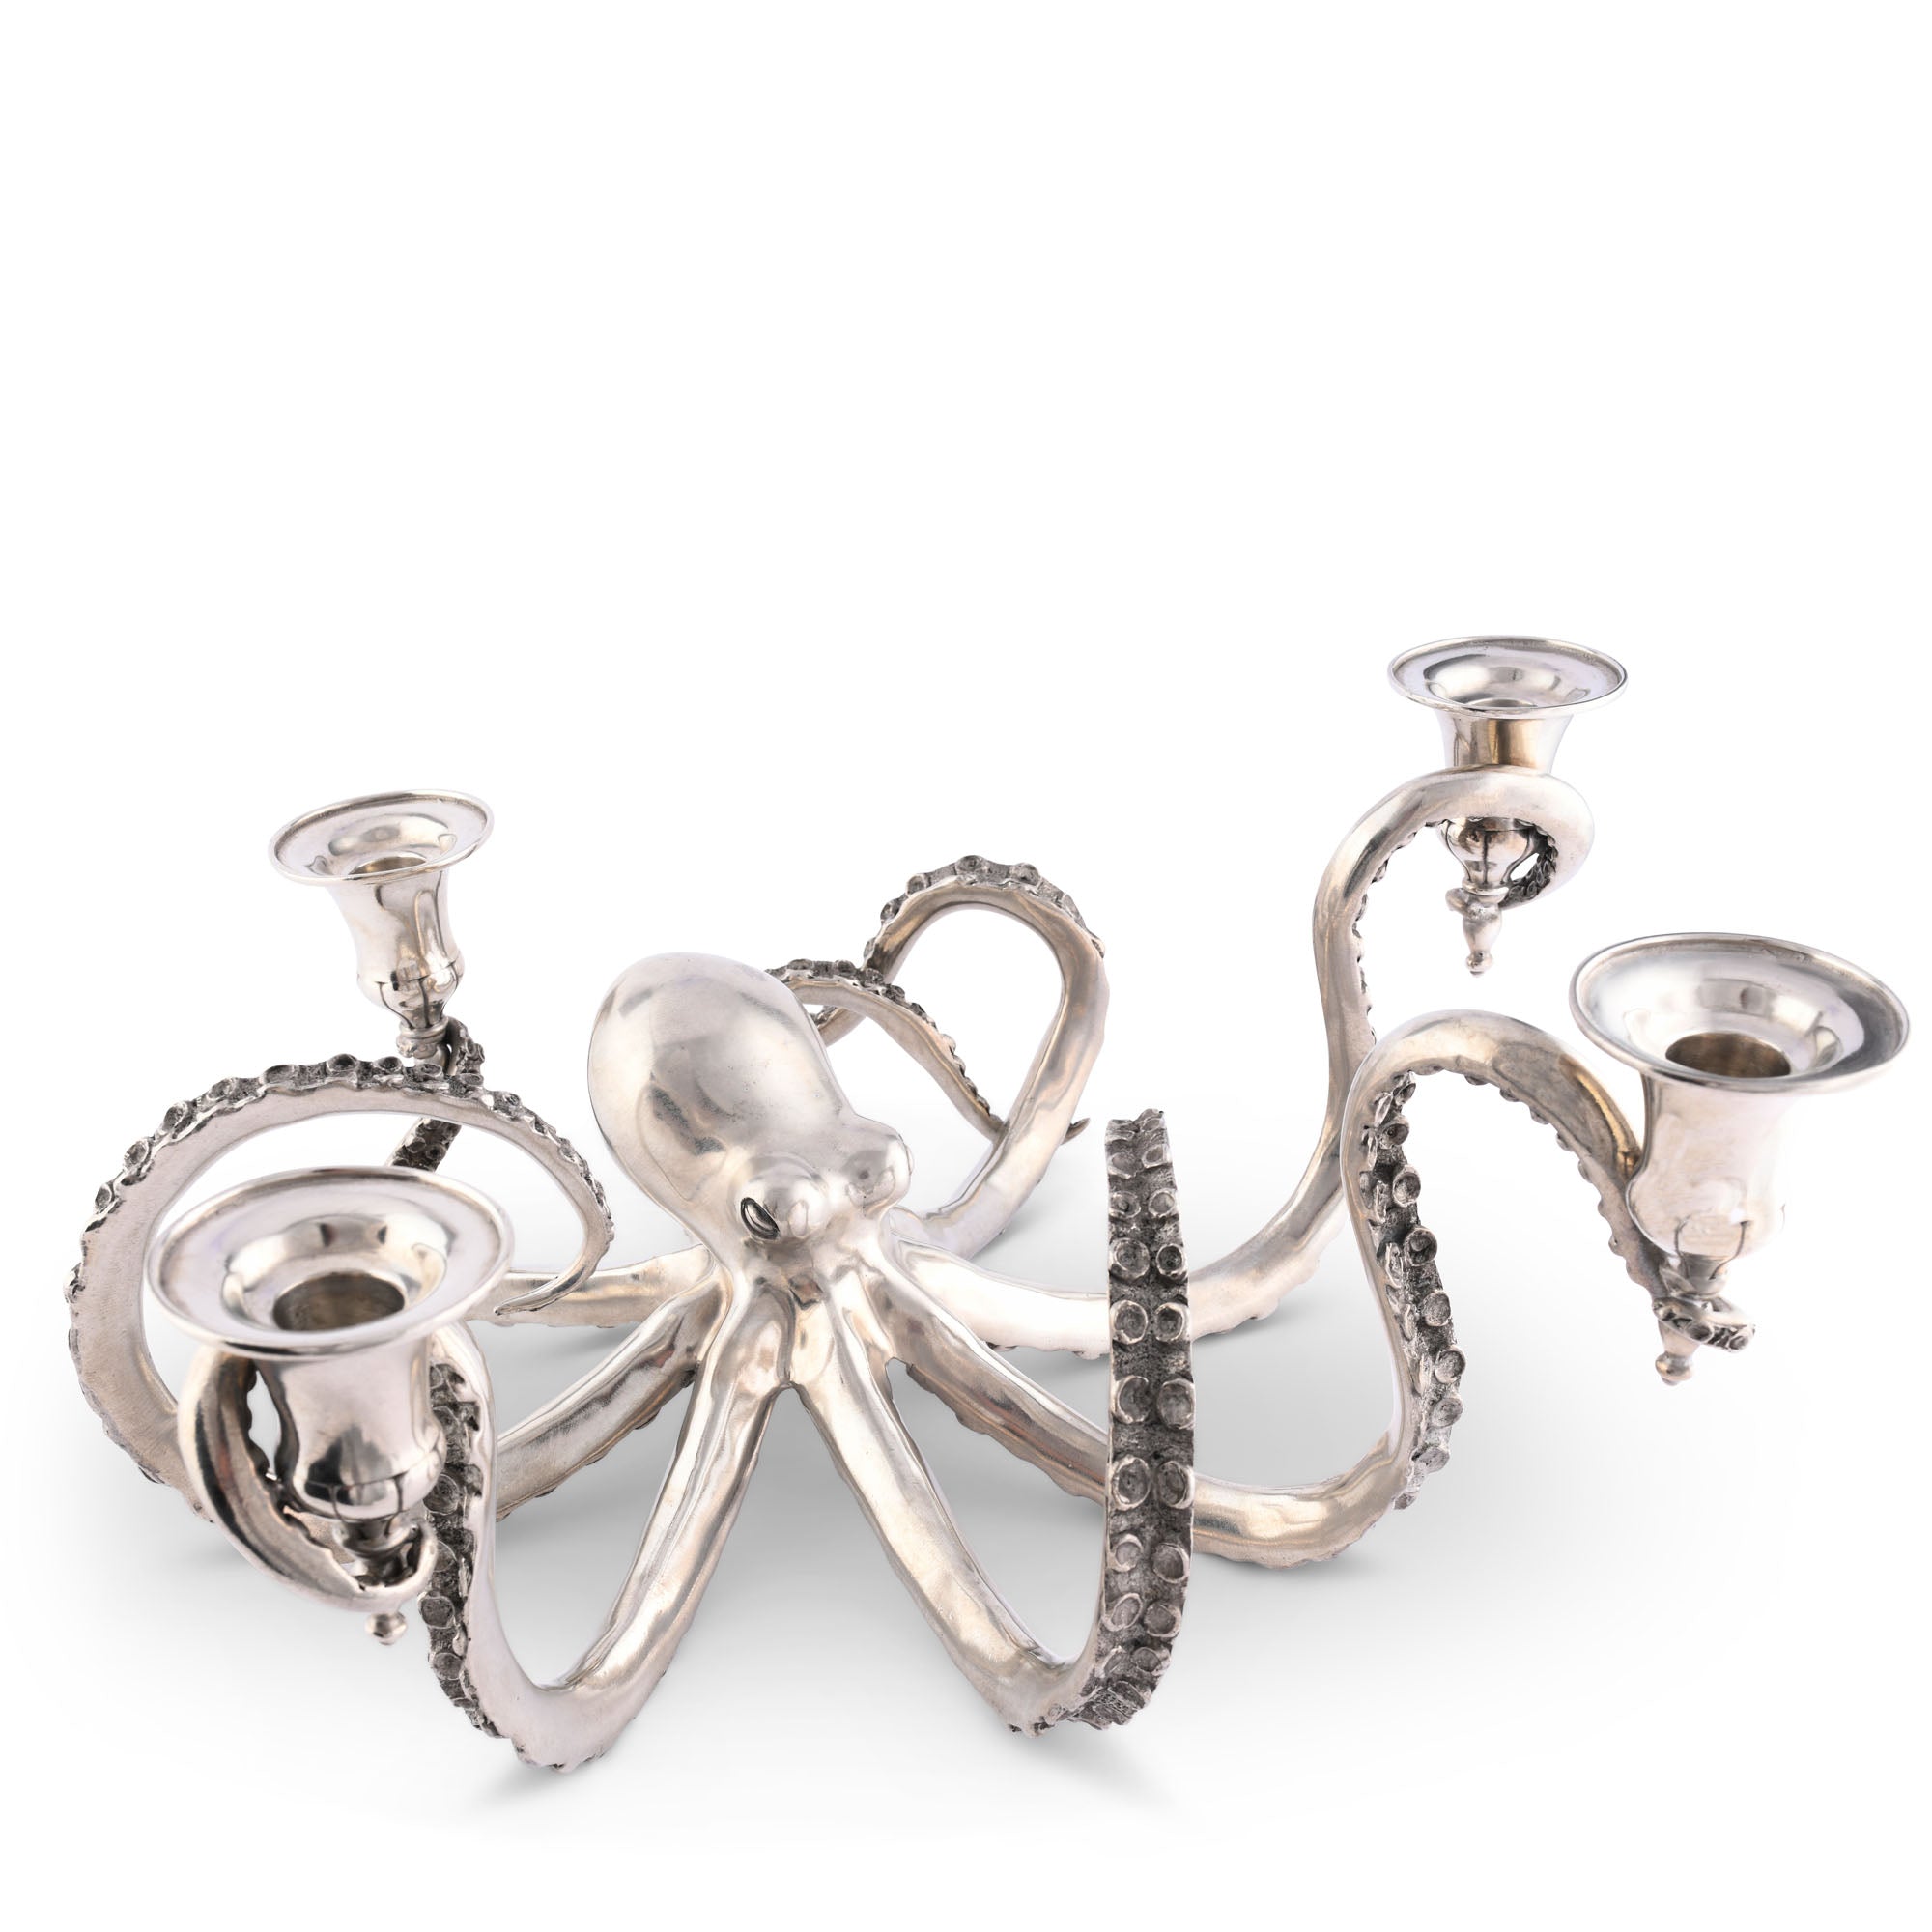 Vagabond House Four Taper Pewter Octopus Candelabrum Product Image